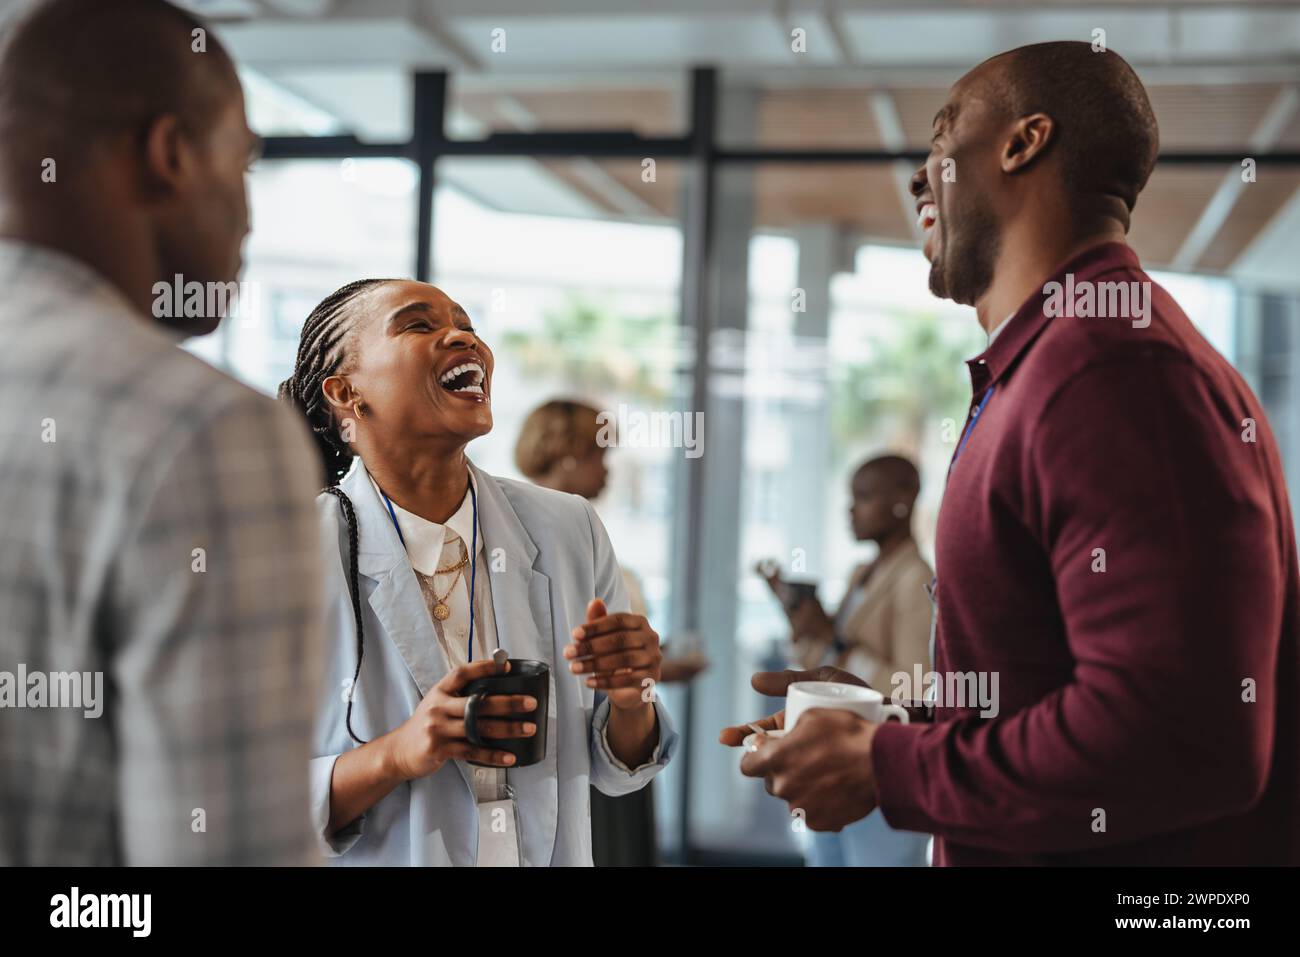 Three business professionals share a laugh during a coffee break at work. Group of colleagues having a funny conversation while standing together in a Stock Photo